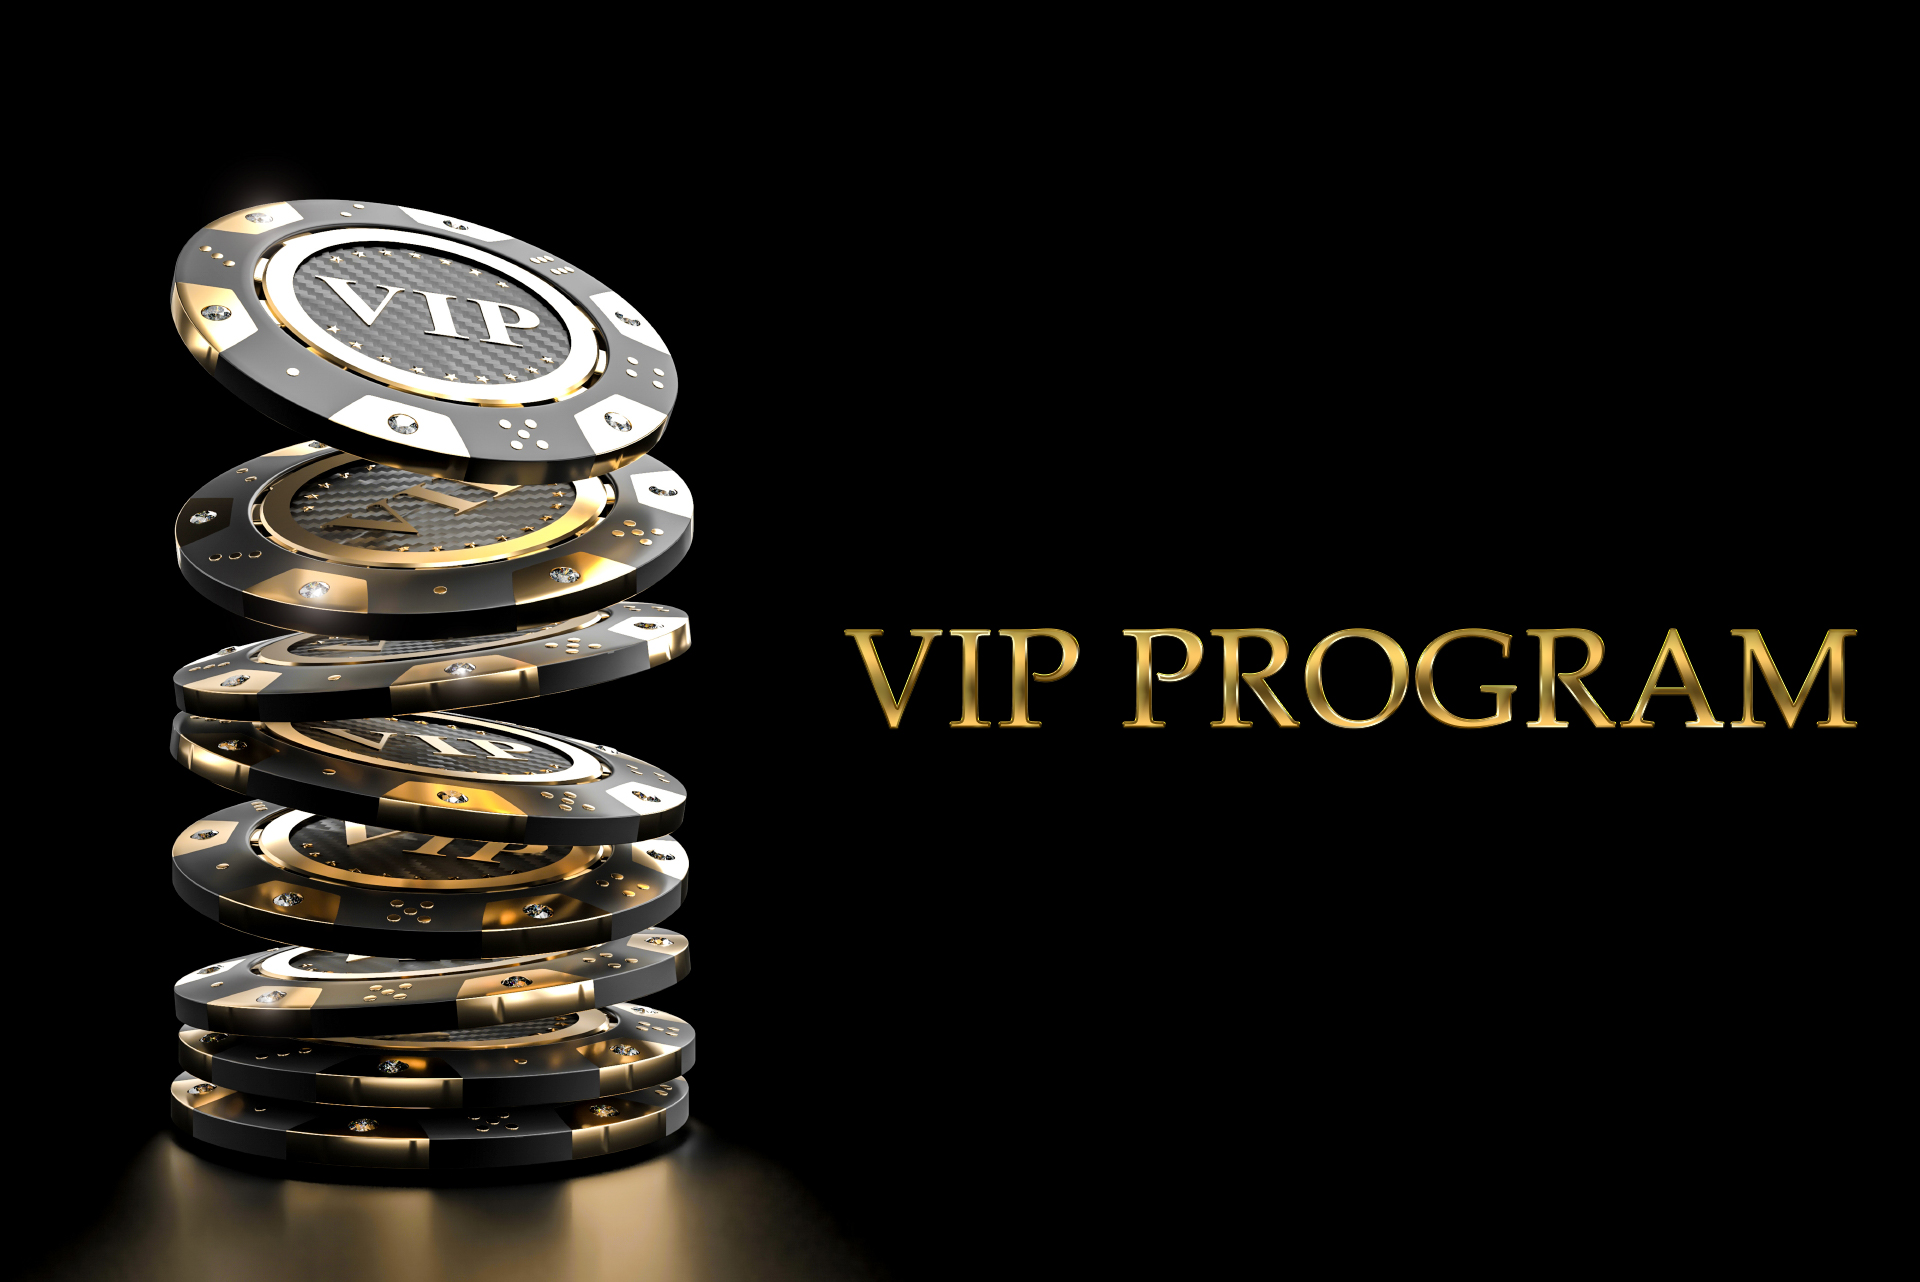 Those who want the elite playing experience should know more about VIP Program.